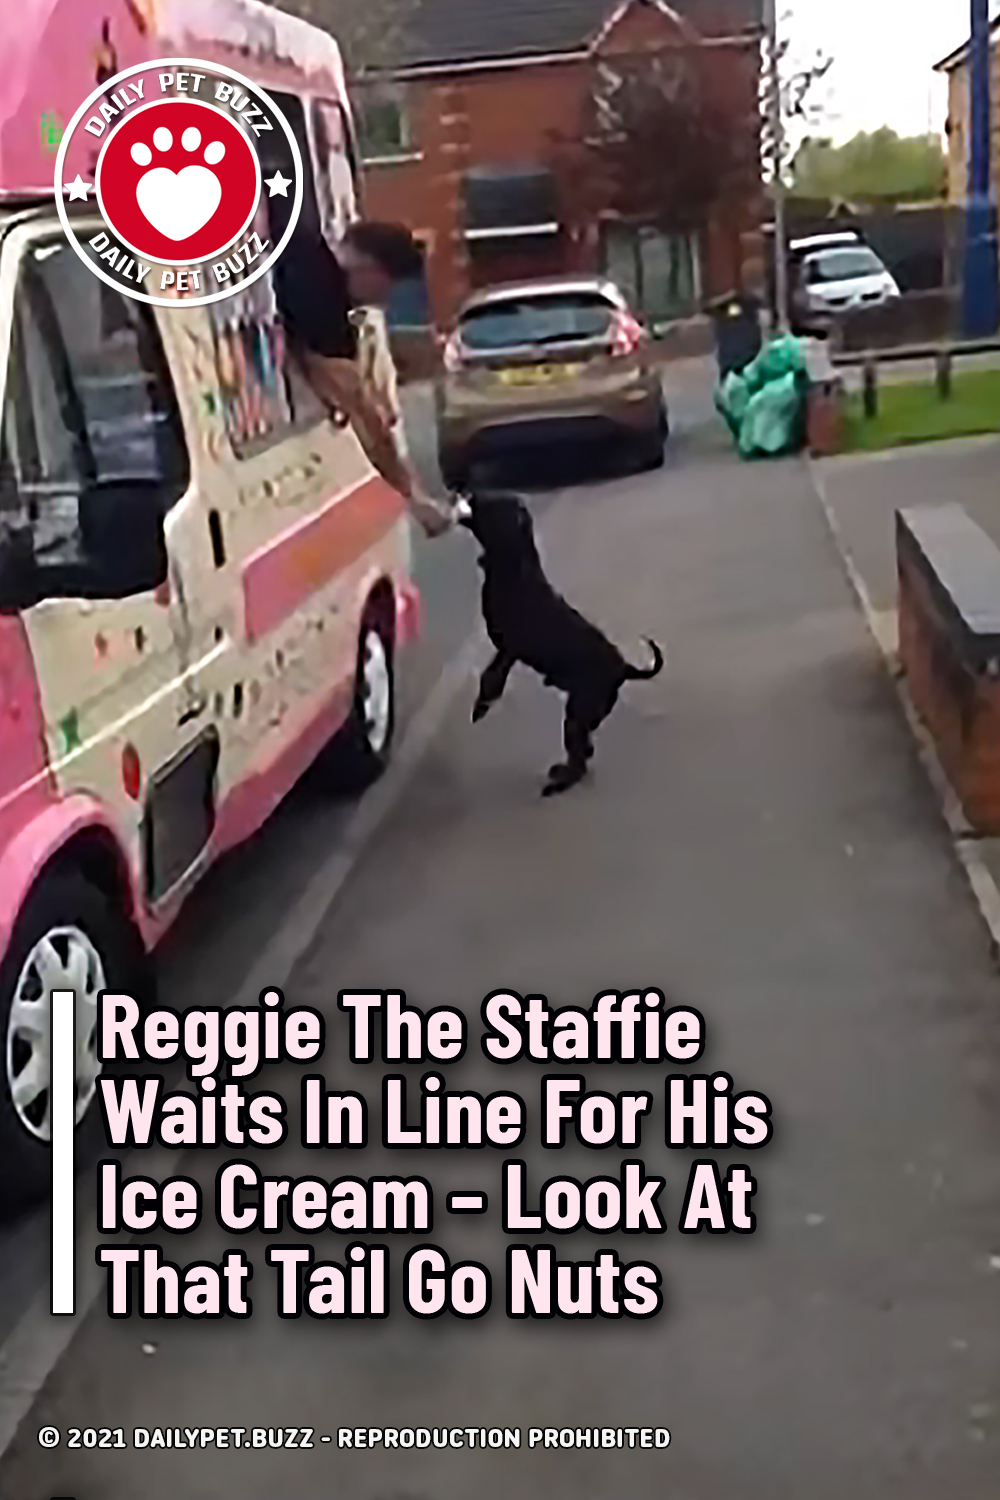 Reggie The Staffie Waits In Line For His Ice Cream – Look At That Tail Go Nuts